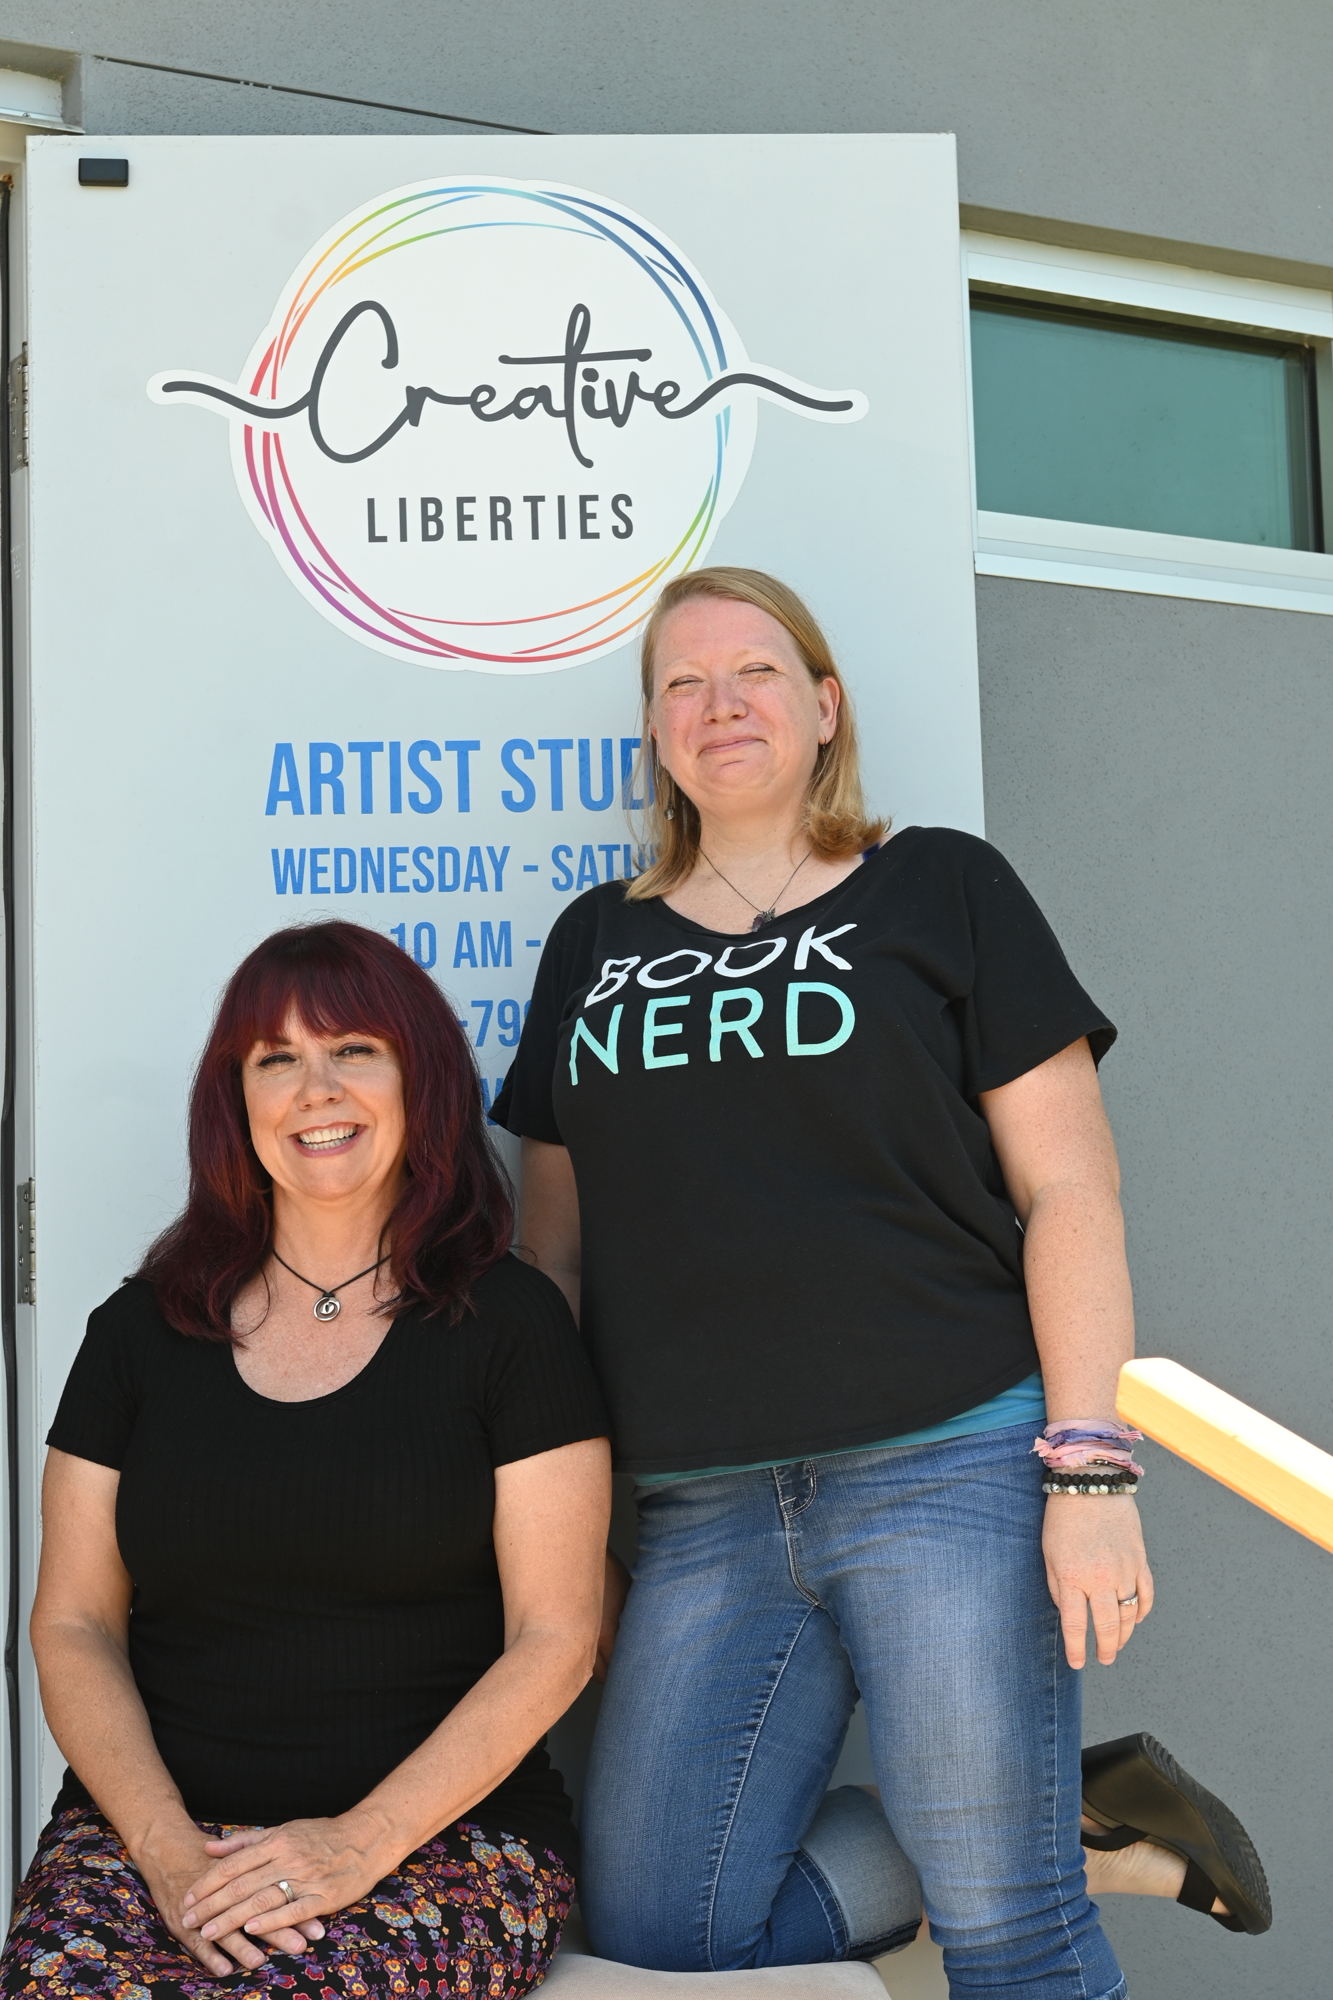 Every day at Creative Liberties is an art therapy session for Barbara Gerdeman and Elizabeth Goodwill. (Photo: Spencer Fordin)